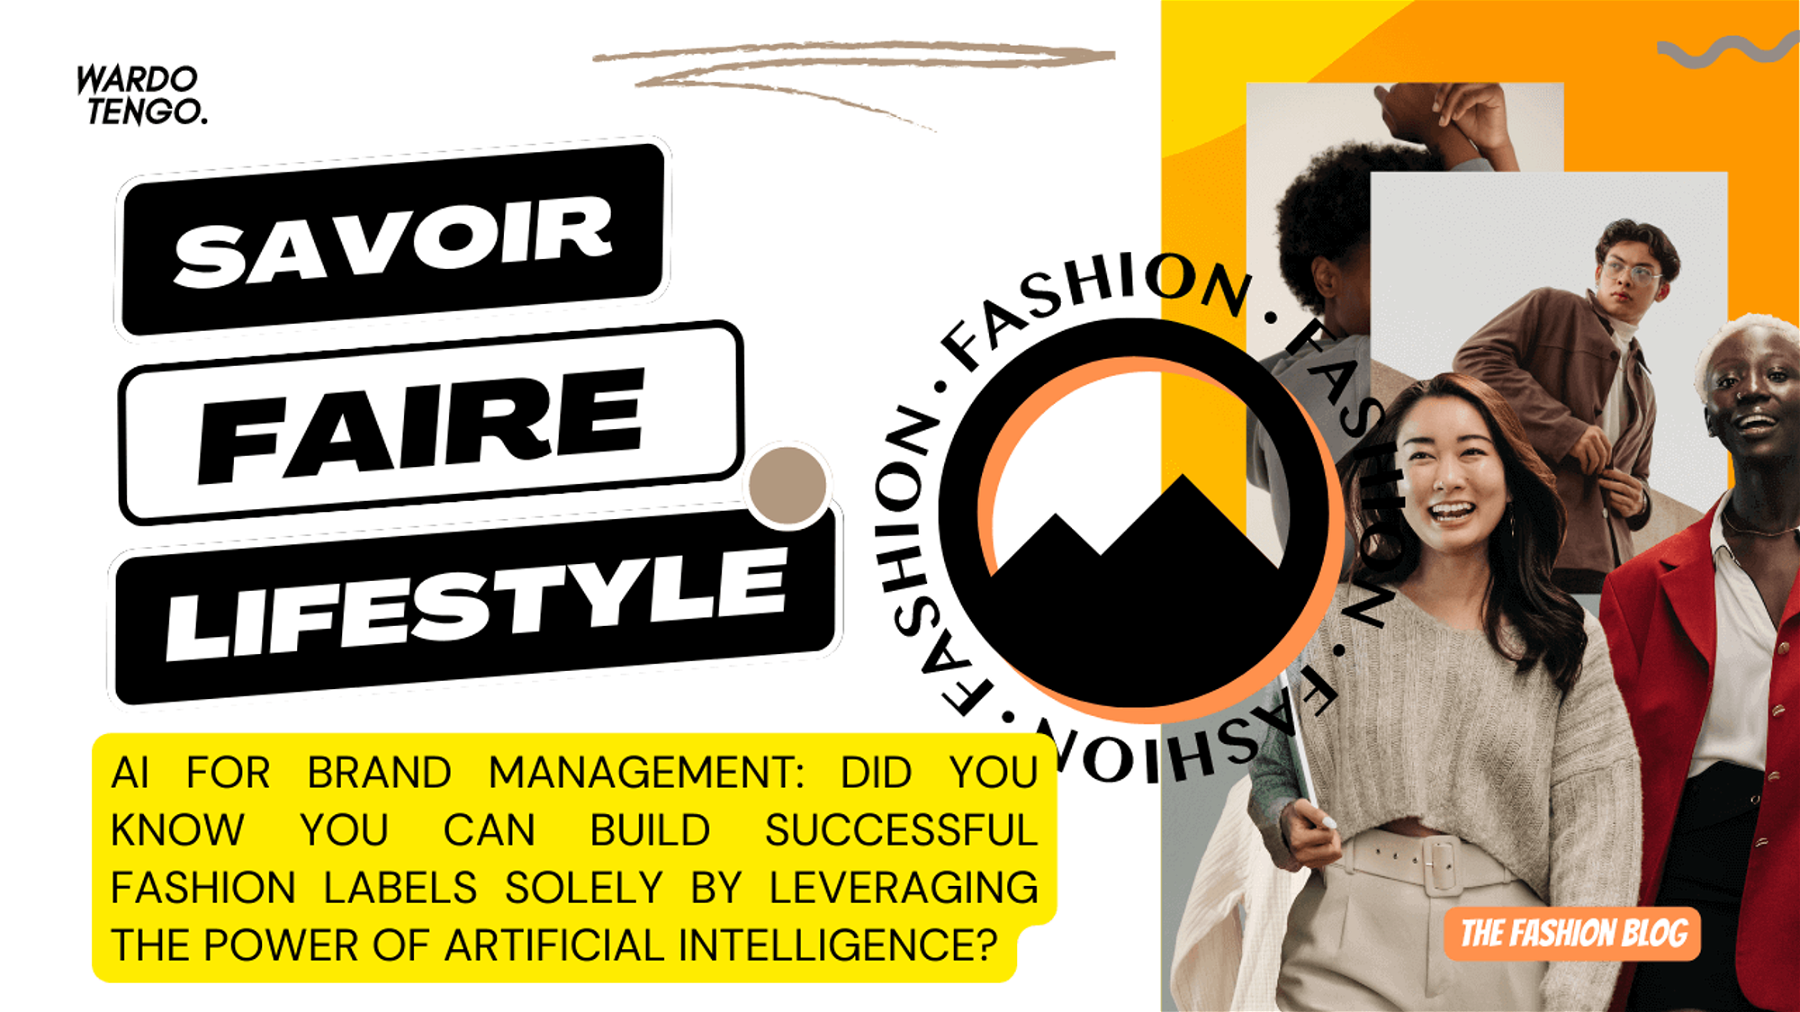 AI for Brand Management: Did You Know You Can Build Successful Fashion Labels Solely By Leveraging The Power of Artificial Intelligence?